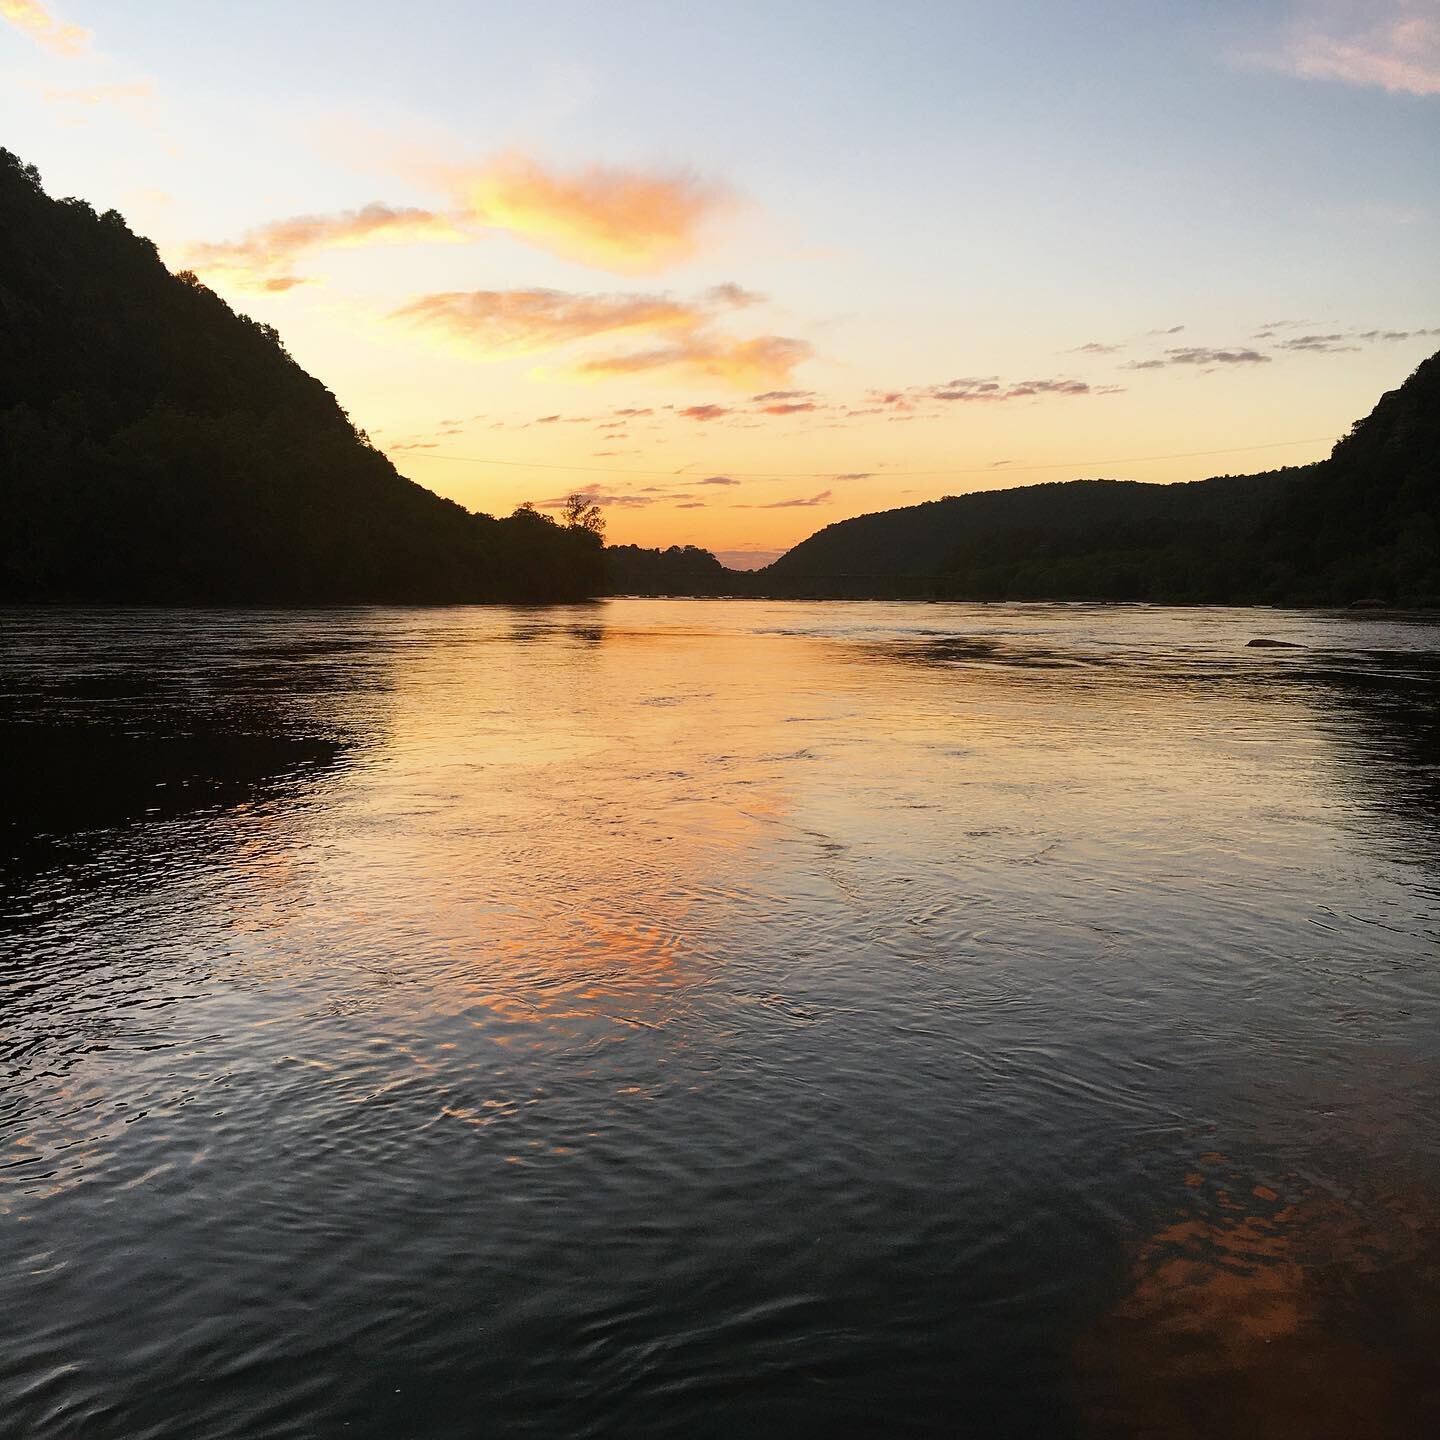 #sunrise  at the #confluence  of the Potomac &amp; Shenandoah rivers. #westvirginia #harpersferry